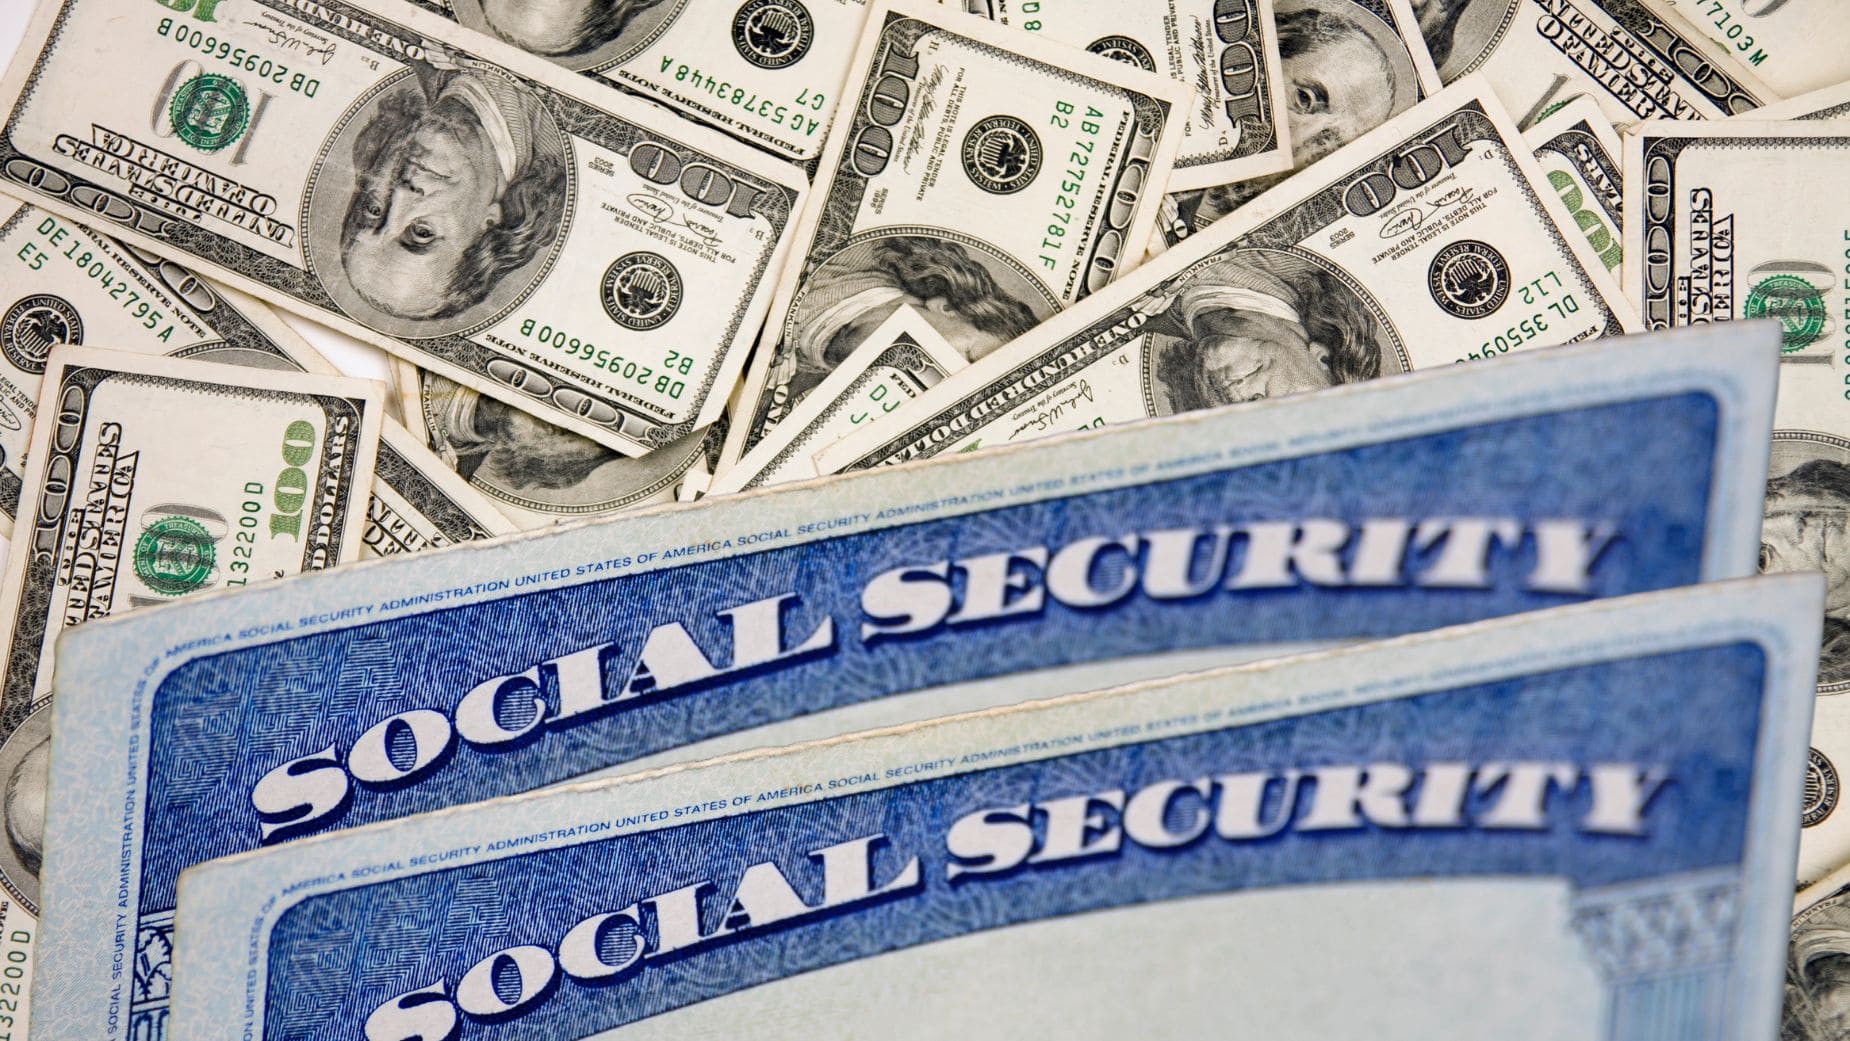 Social Security will send a new payment in March 13th